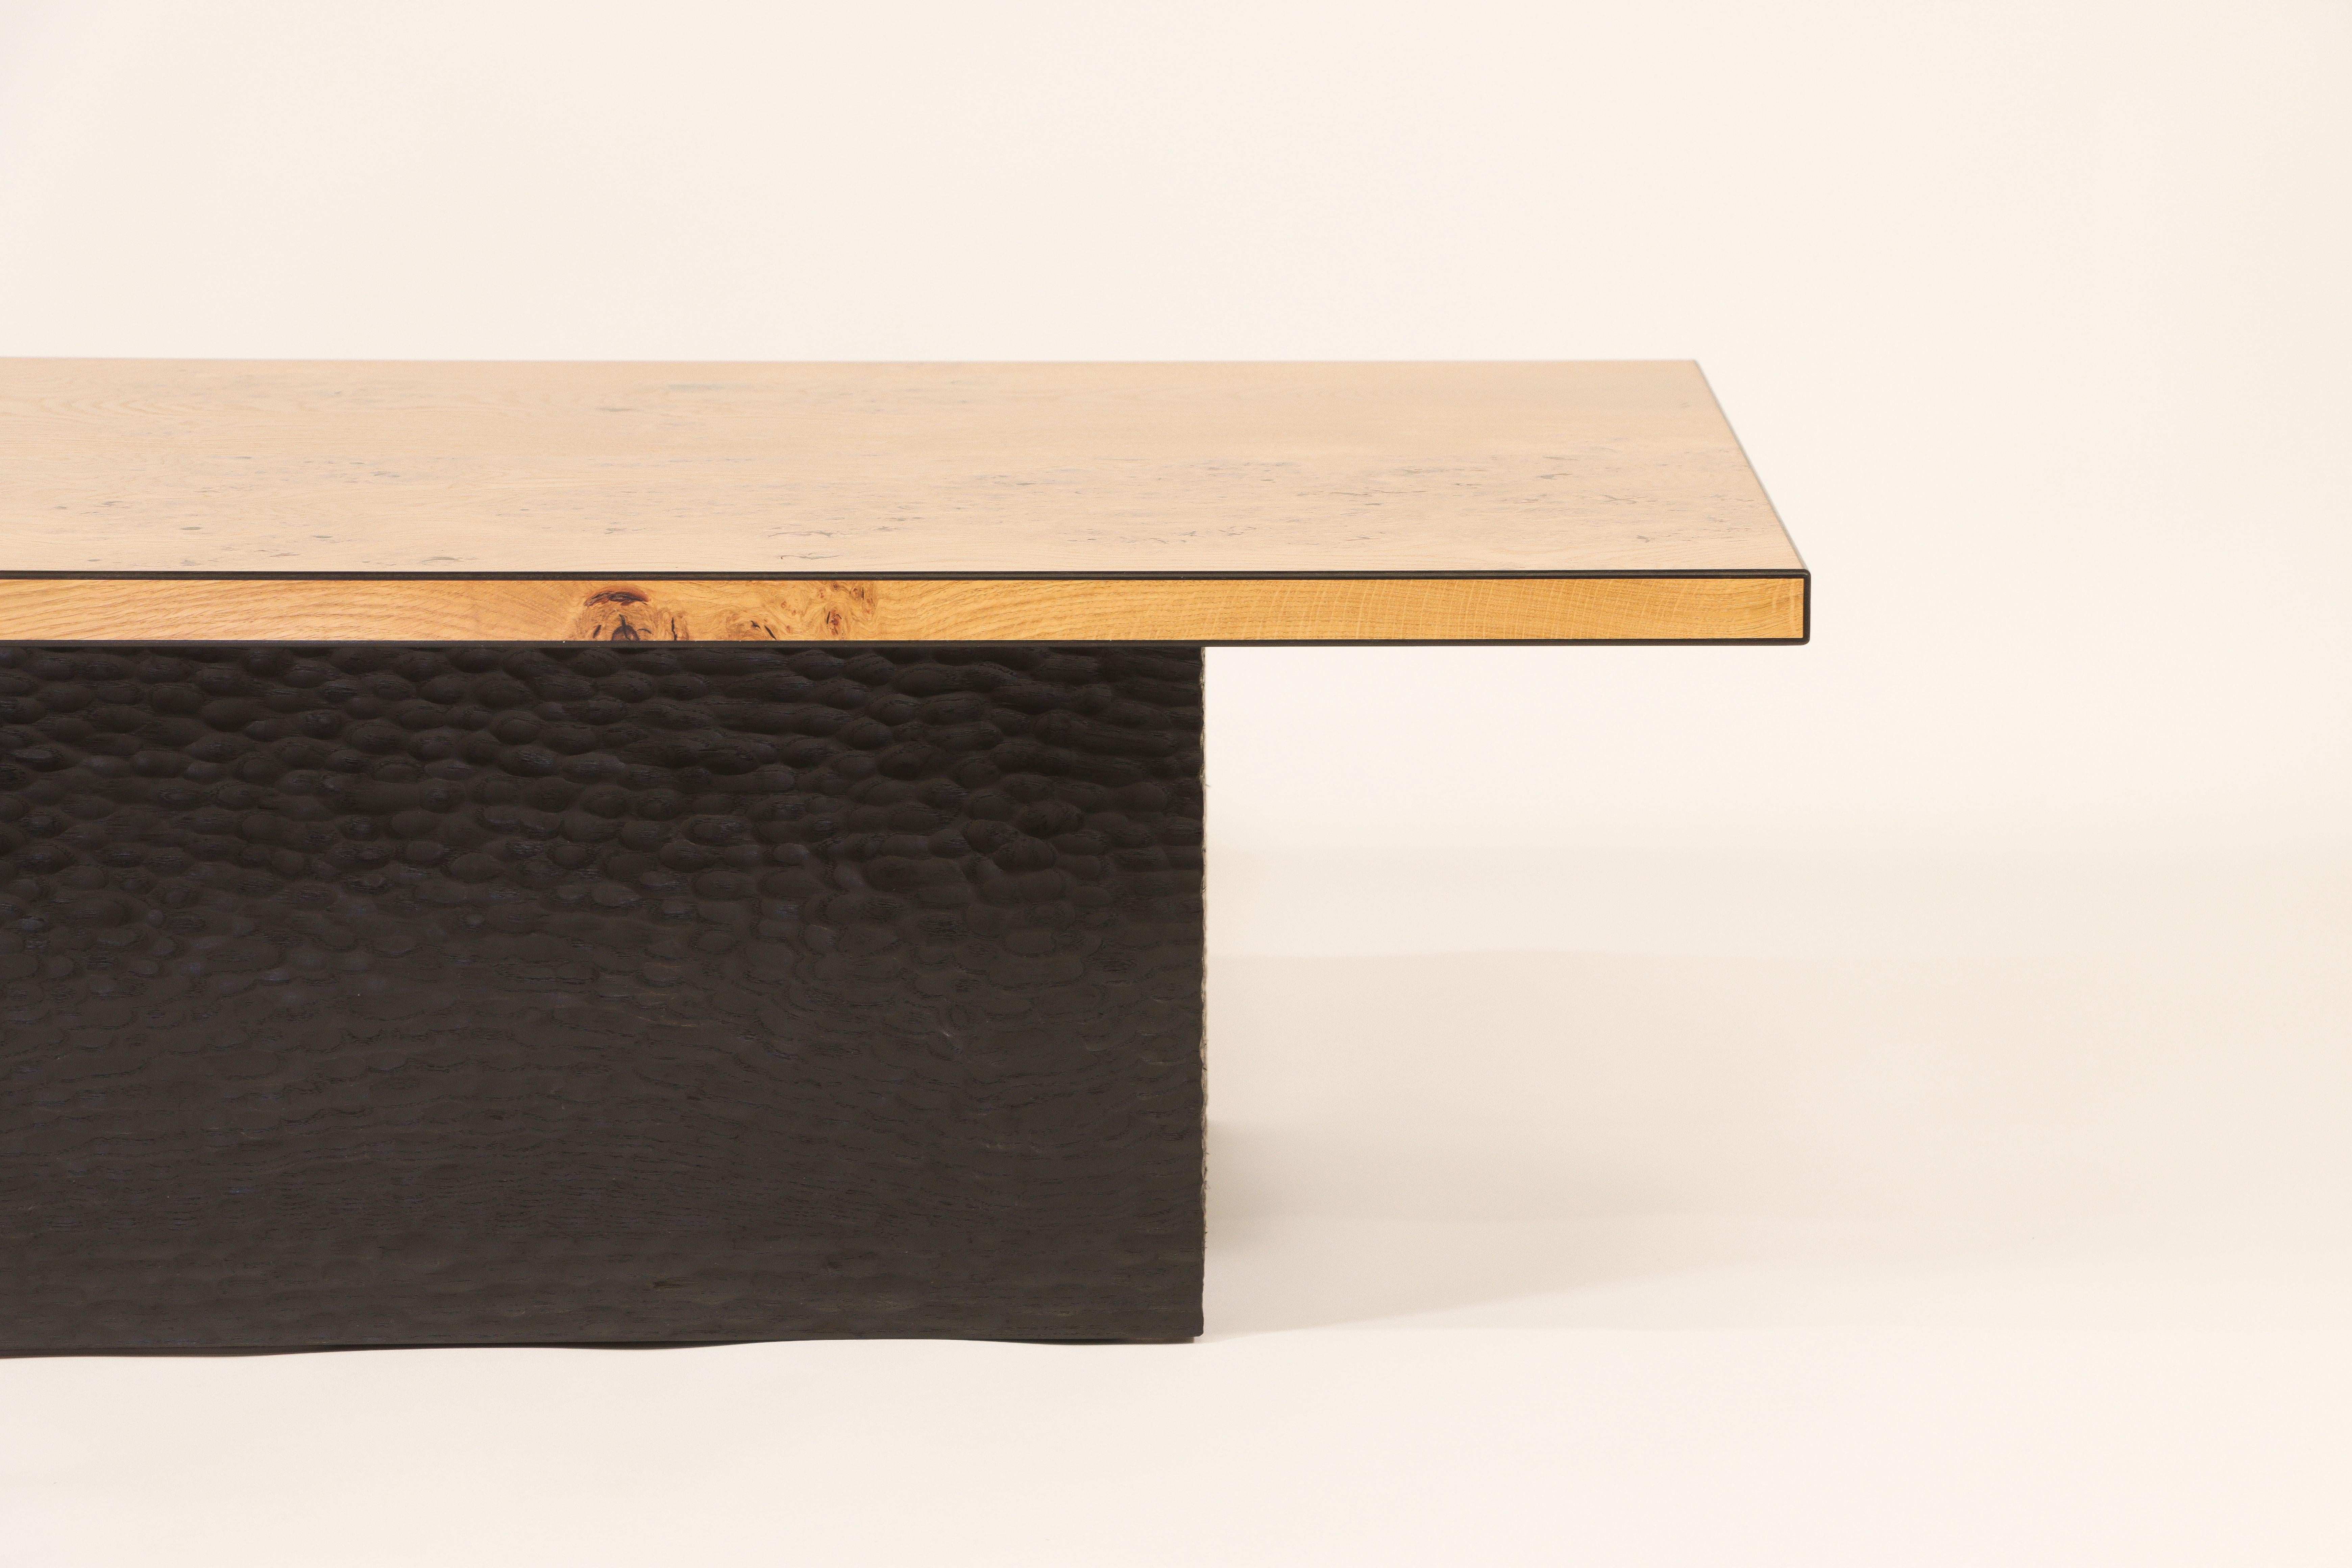 The tabletop is constructed from 450-year-old burr oak from Sutherland in Scotland and has African black ebony inlay banding around all the edges. The base is solid ash with a hand-carved textured surface that has been ebonised black. This table is